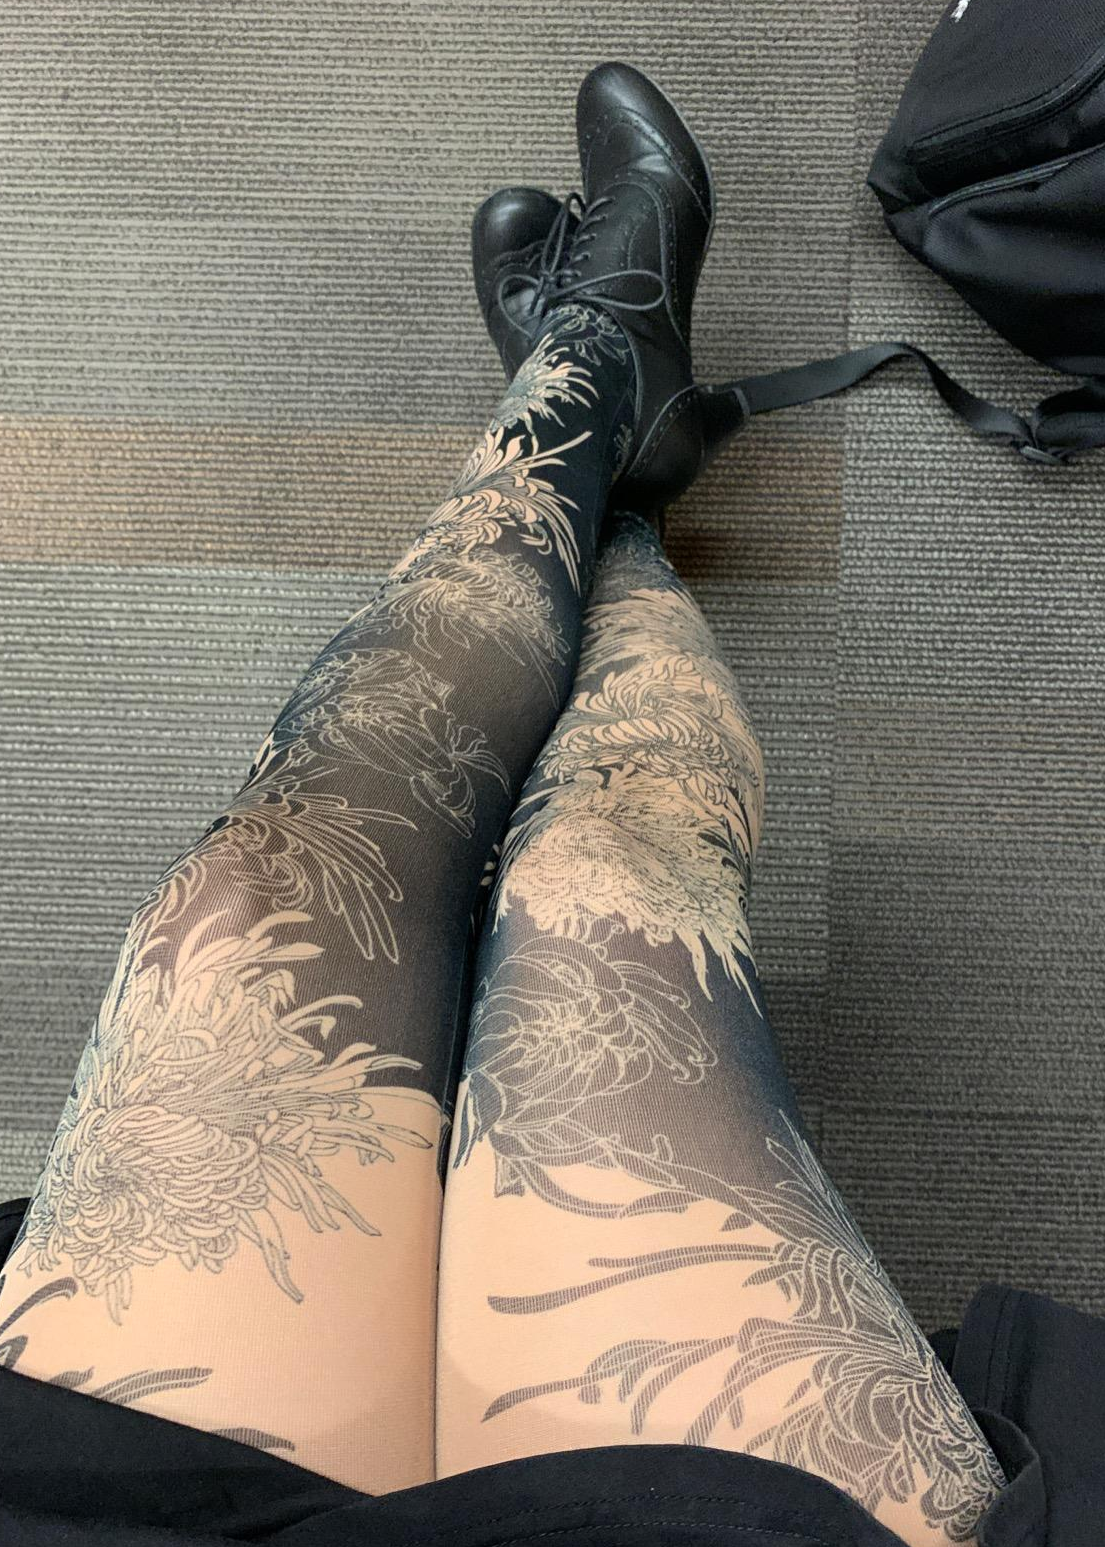 27 Best Patterned Tights To Show Some Leggy Personality